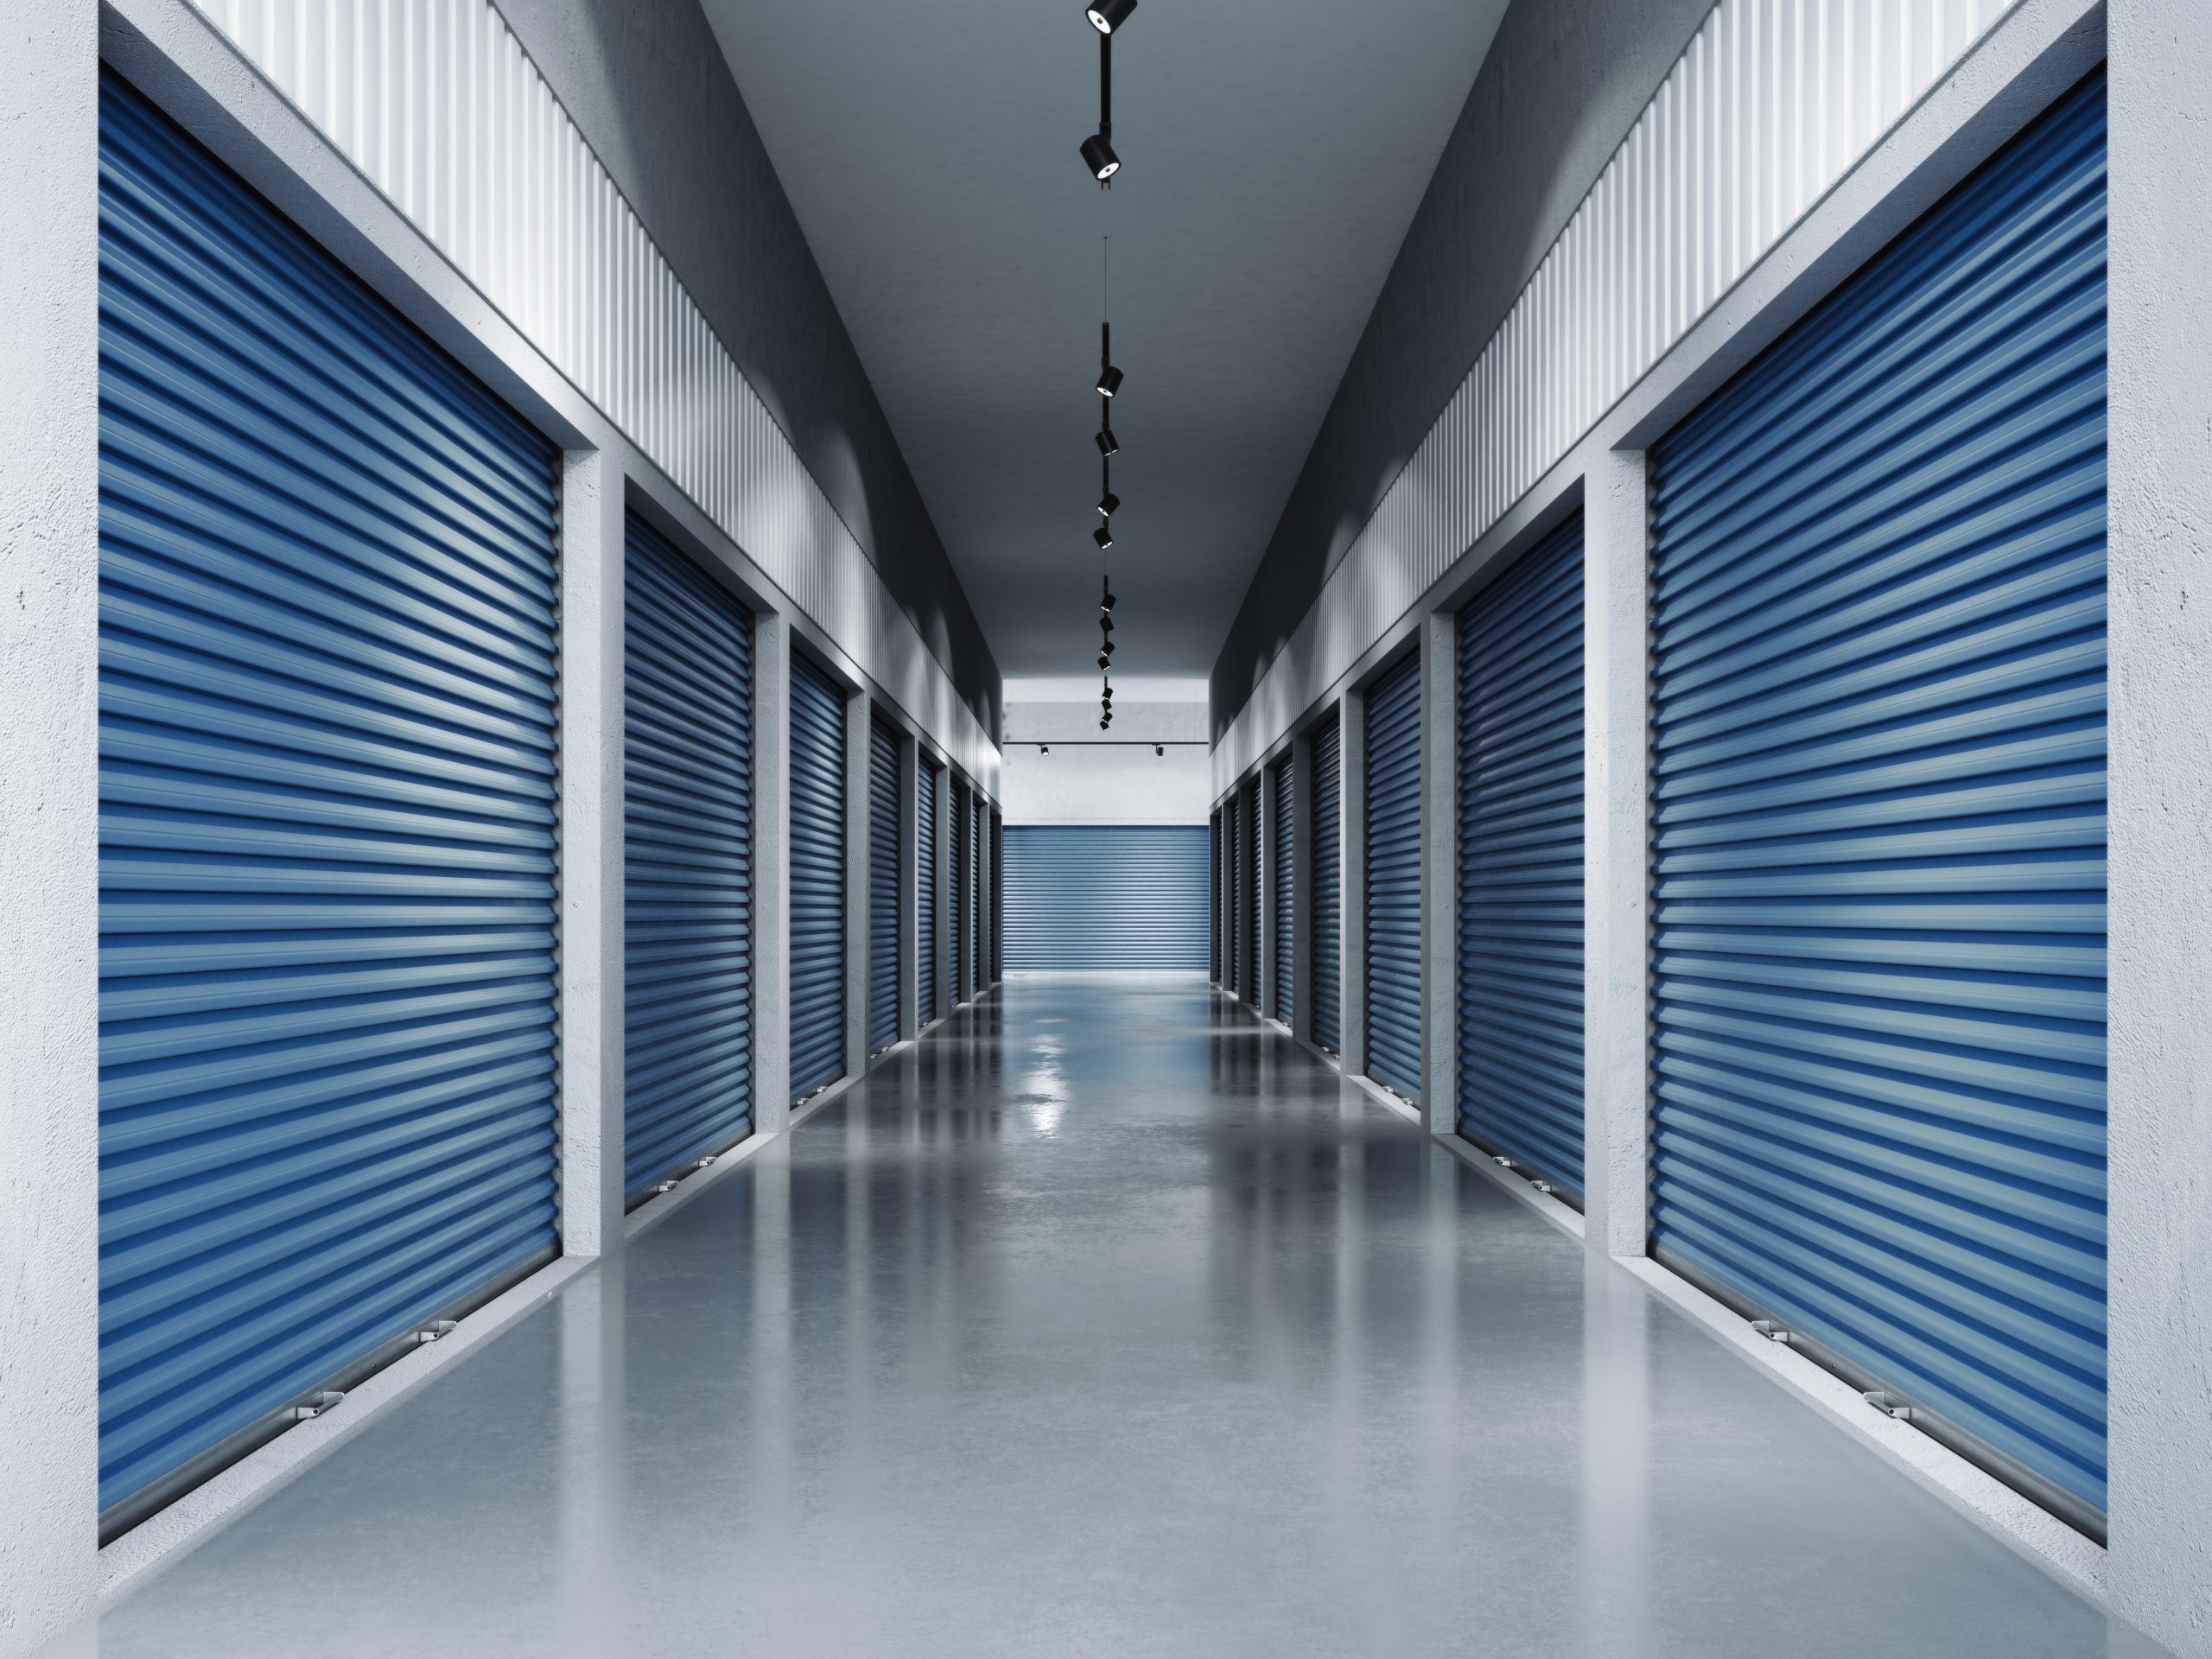 self storage do's and don'ts - self storage well lit hallway with blue rolling doors